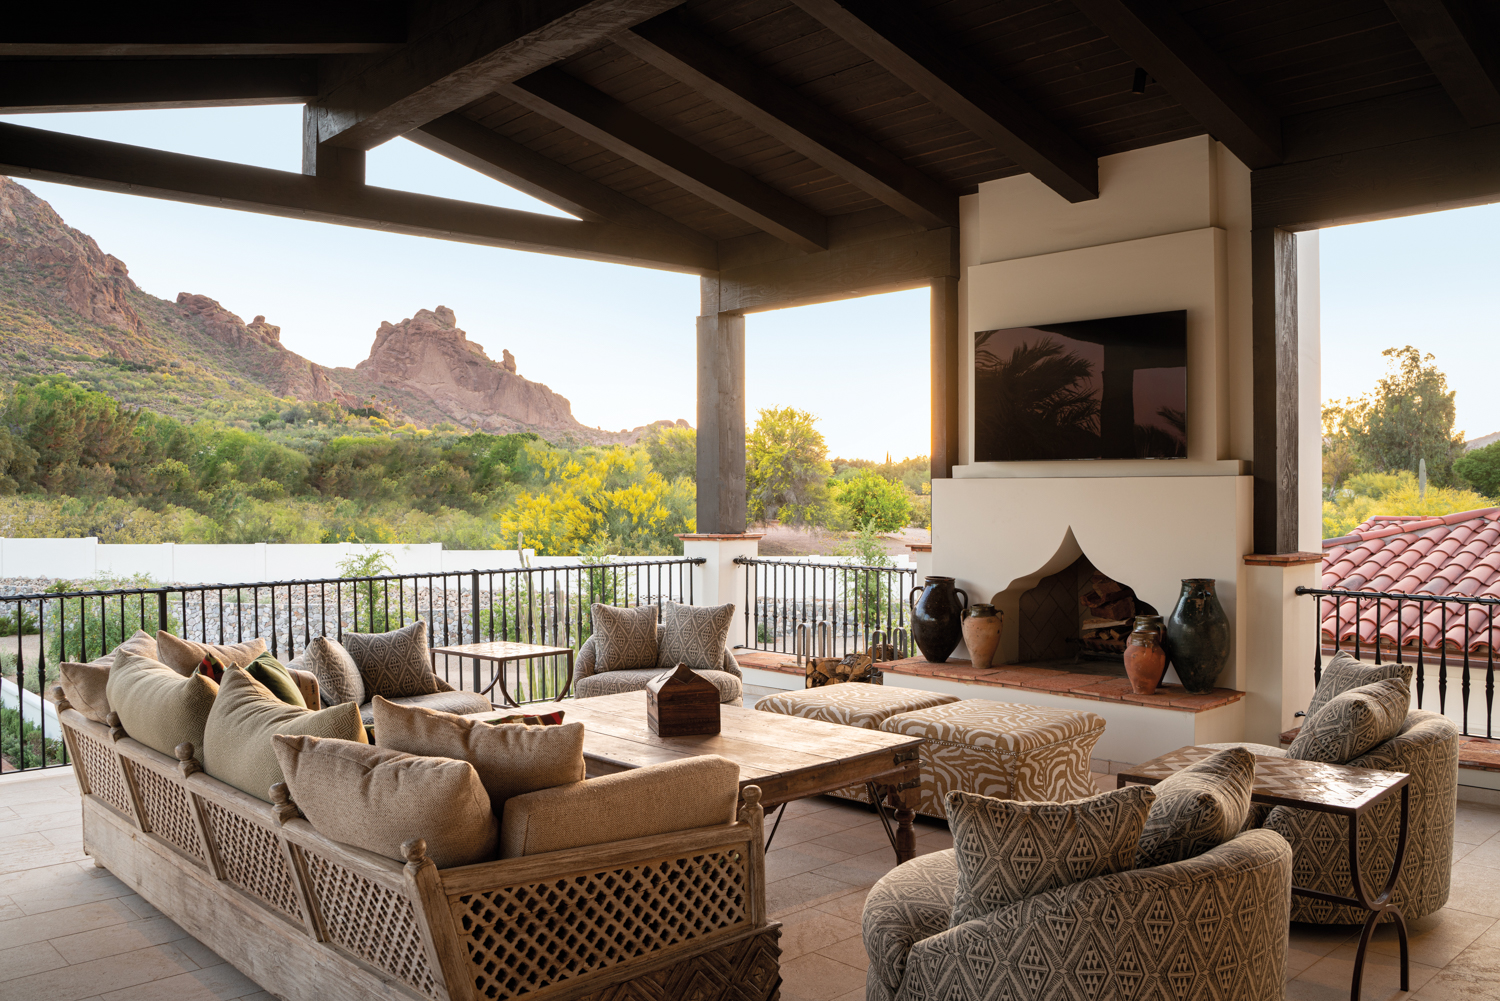 Covered outdoor lounge space with a TV over a fireplace, patterned taupe seating and mountain views